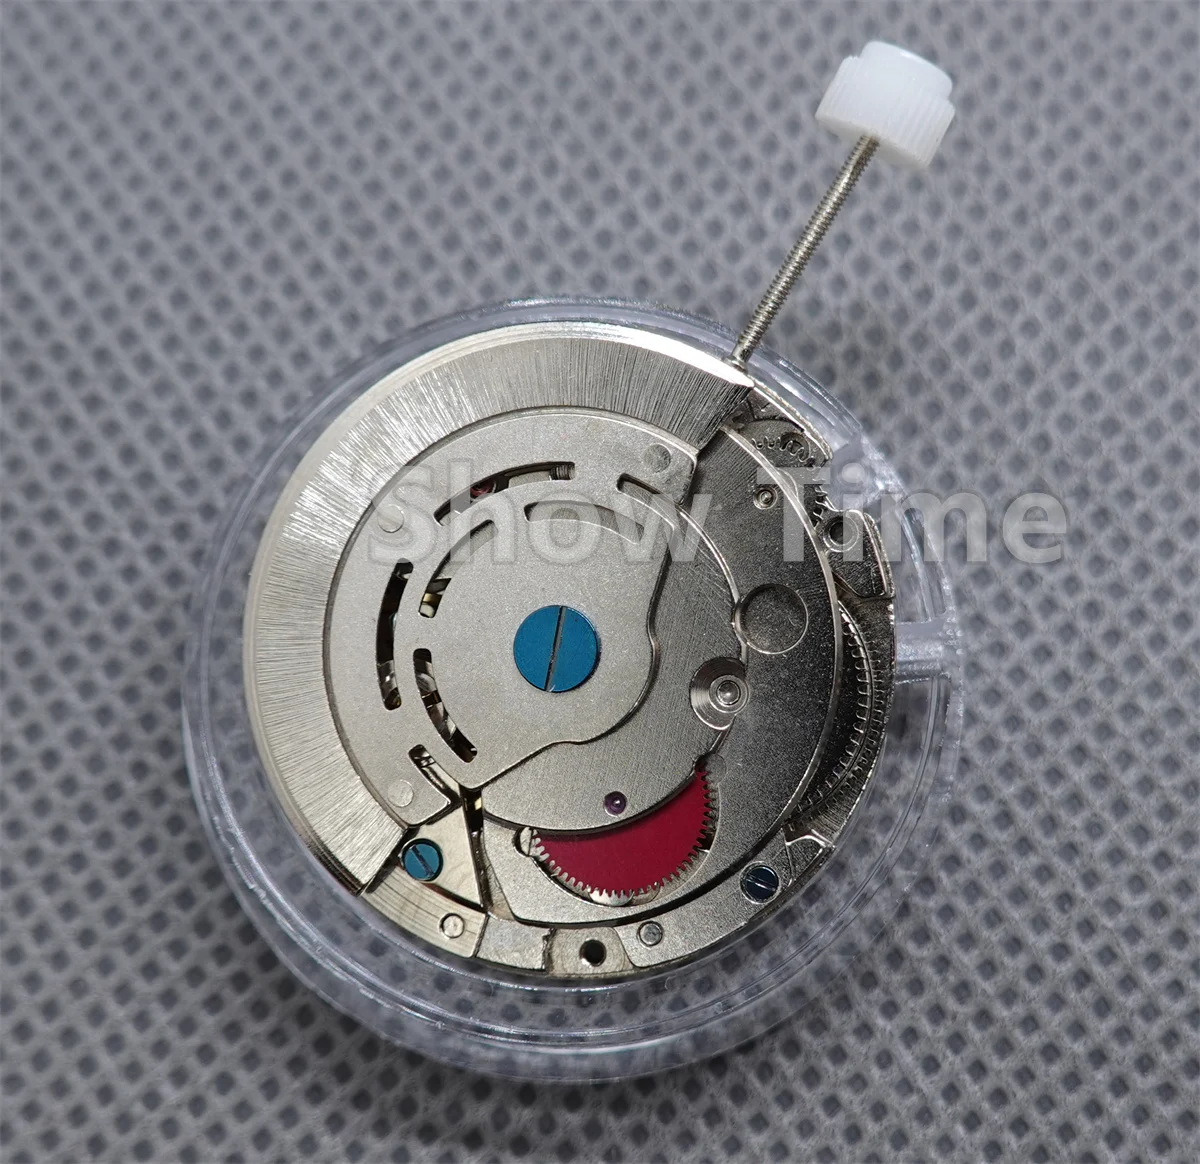 White Mechanical Automatic Watch Replacement Movement Calendar Display Watch Repair Parts For 2813 8205 Watches Clock Movement